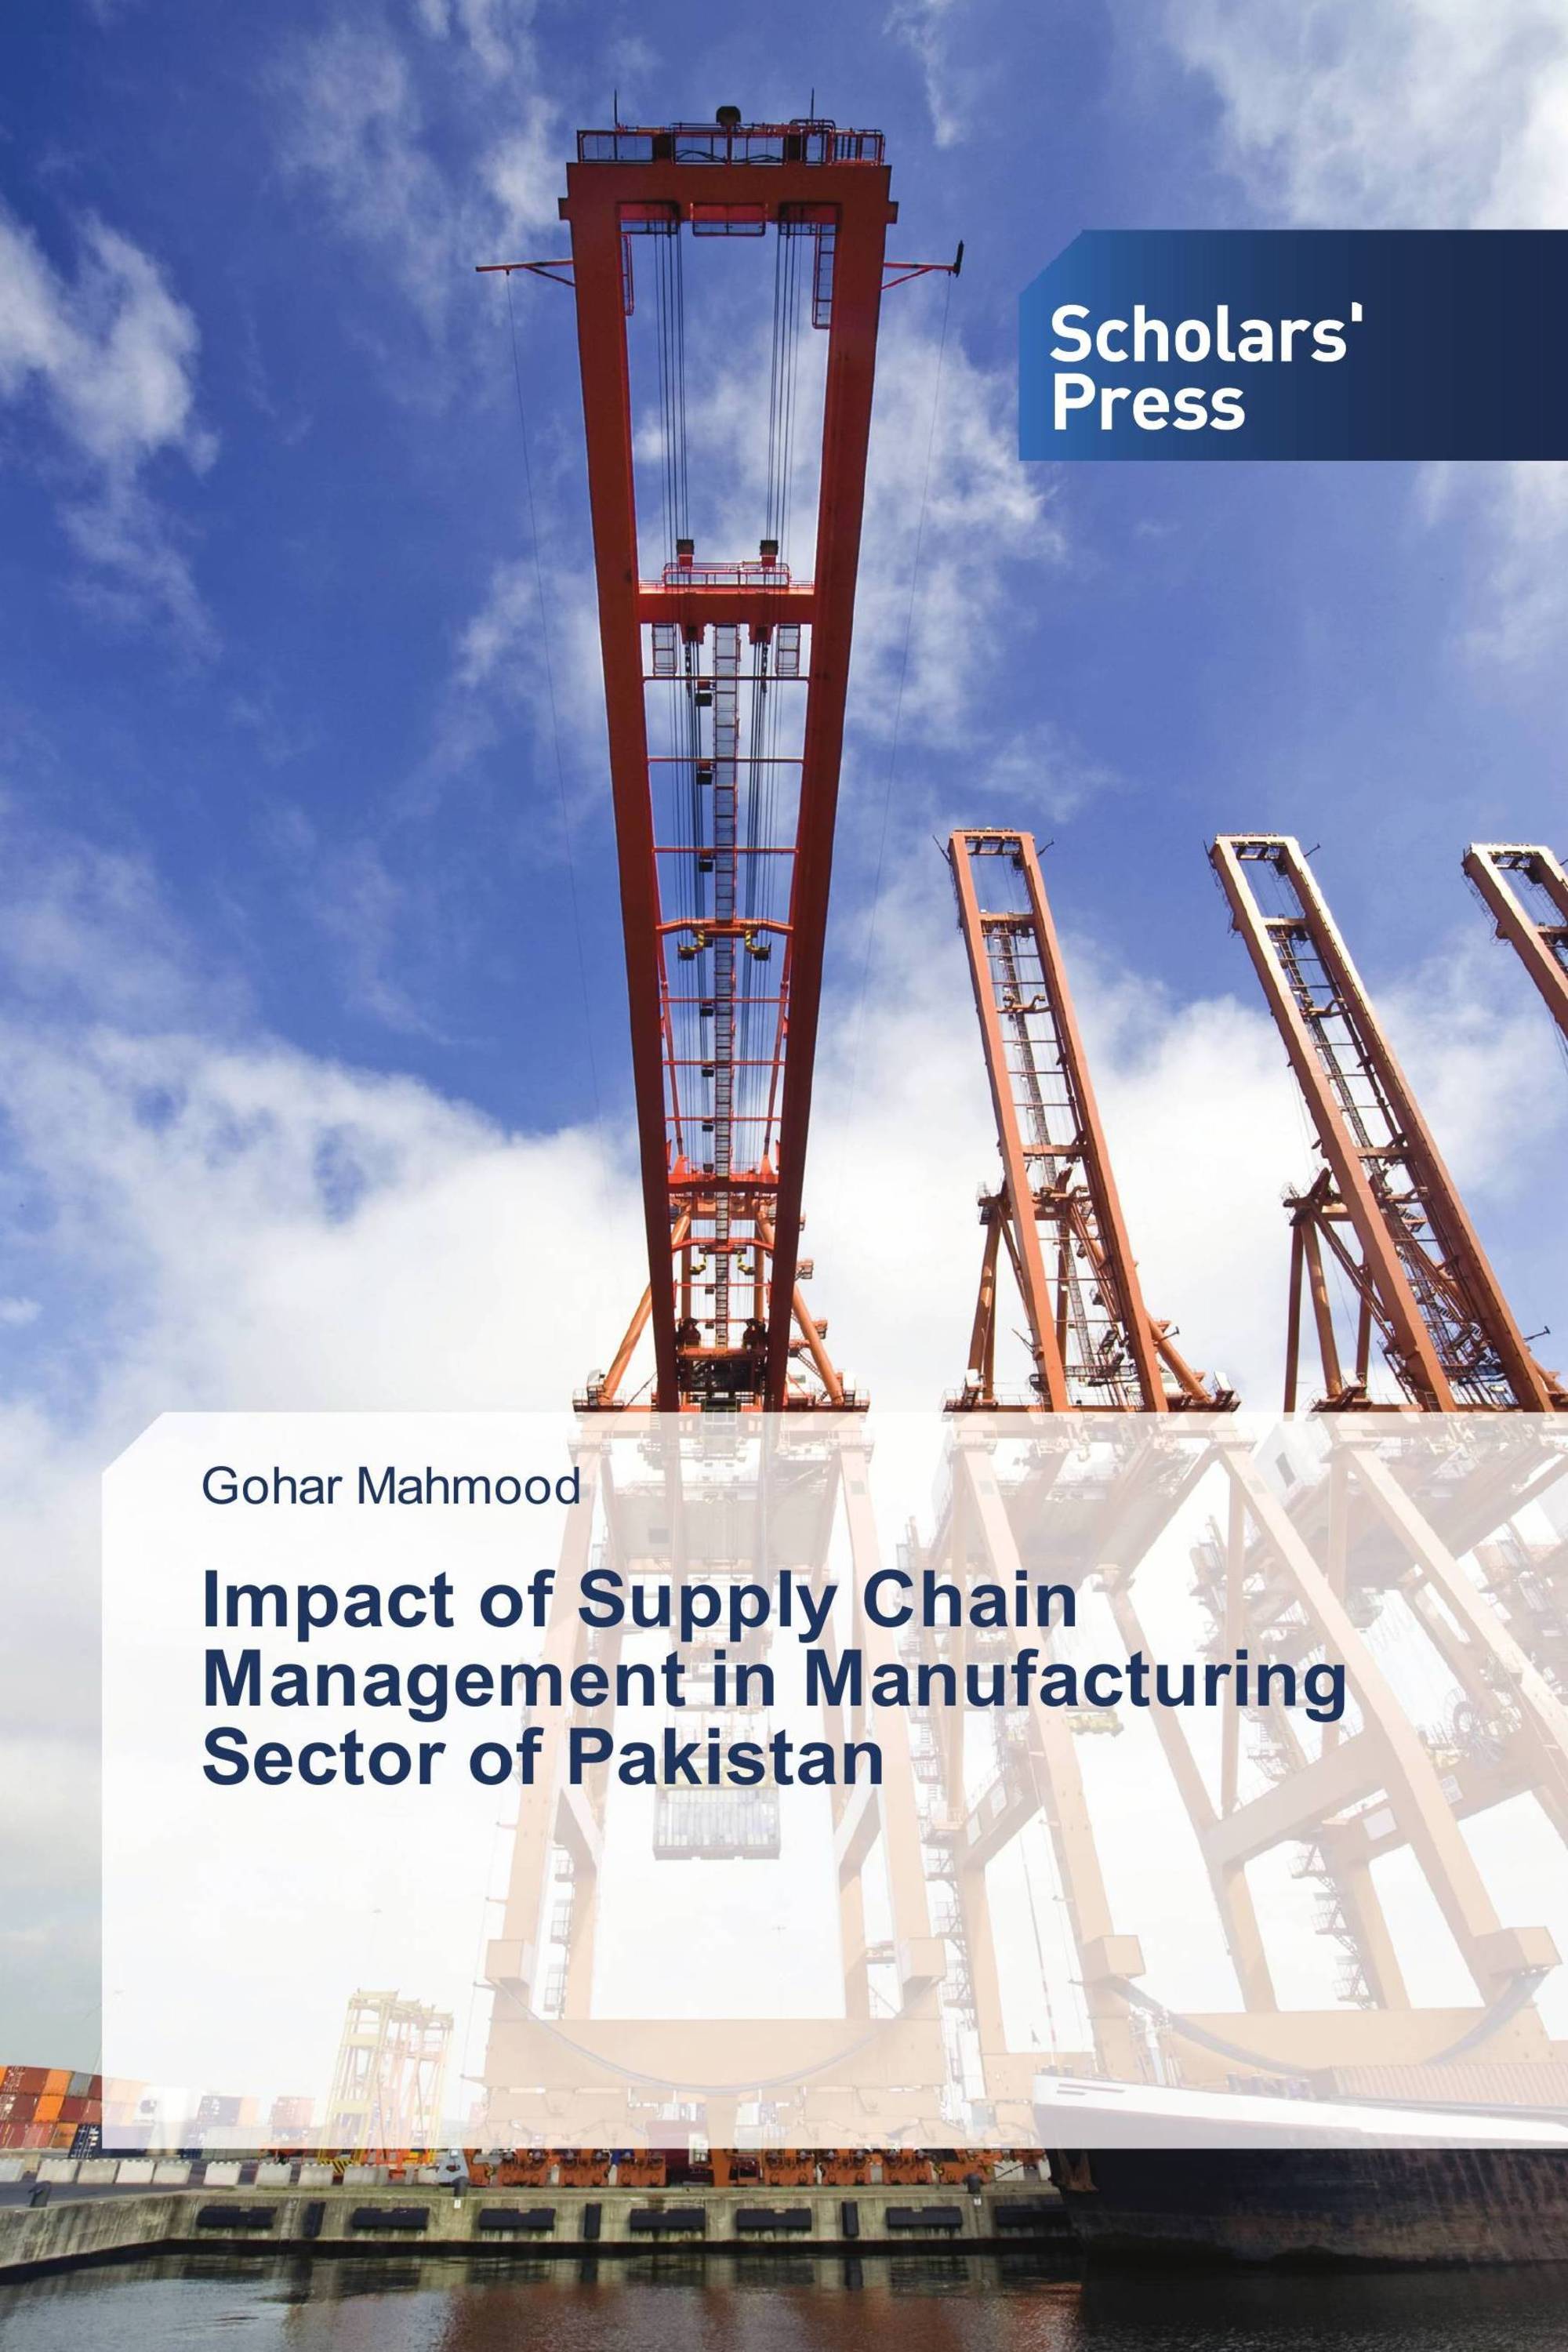 Impact of Supply Chain Management in Manufacturing Sector of Pakistan